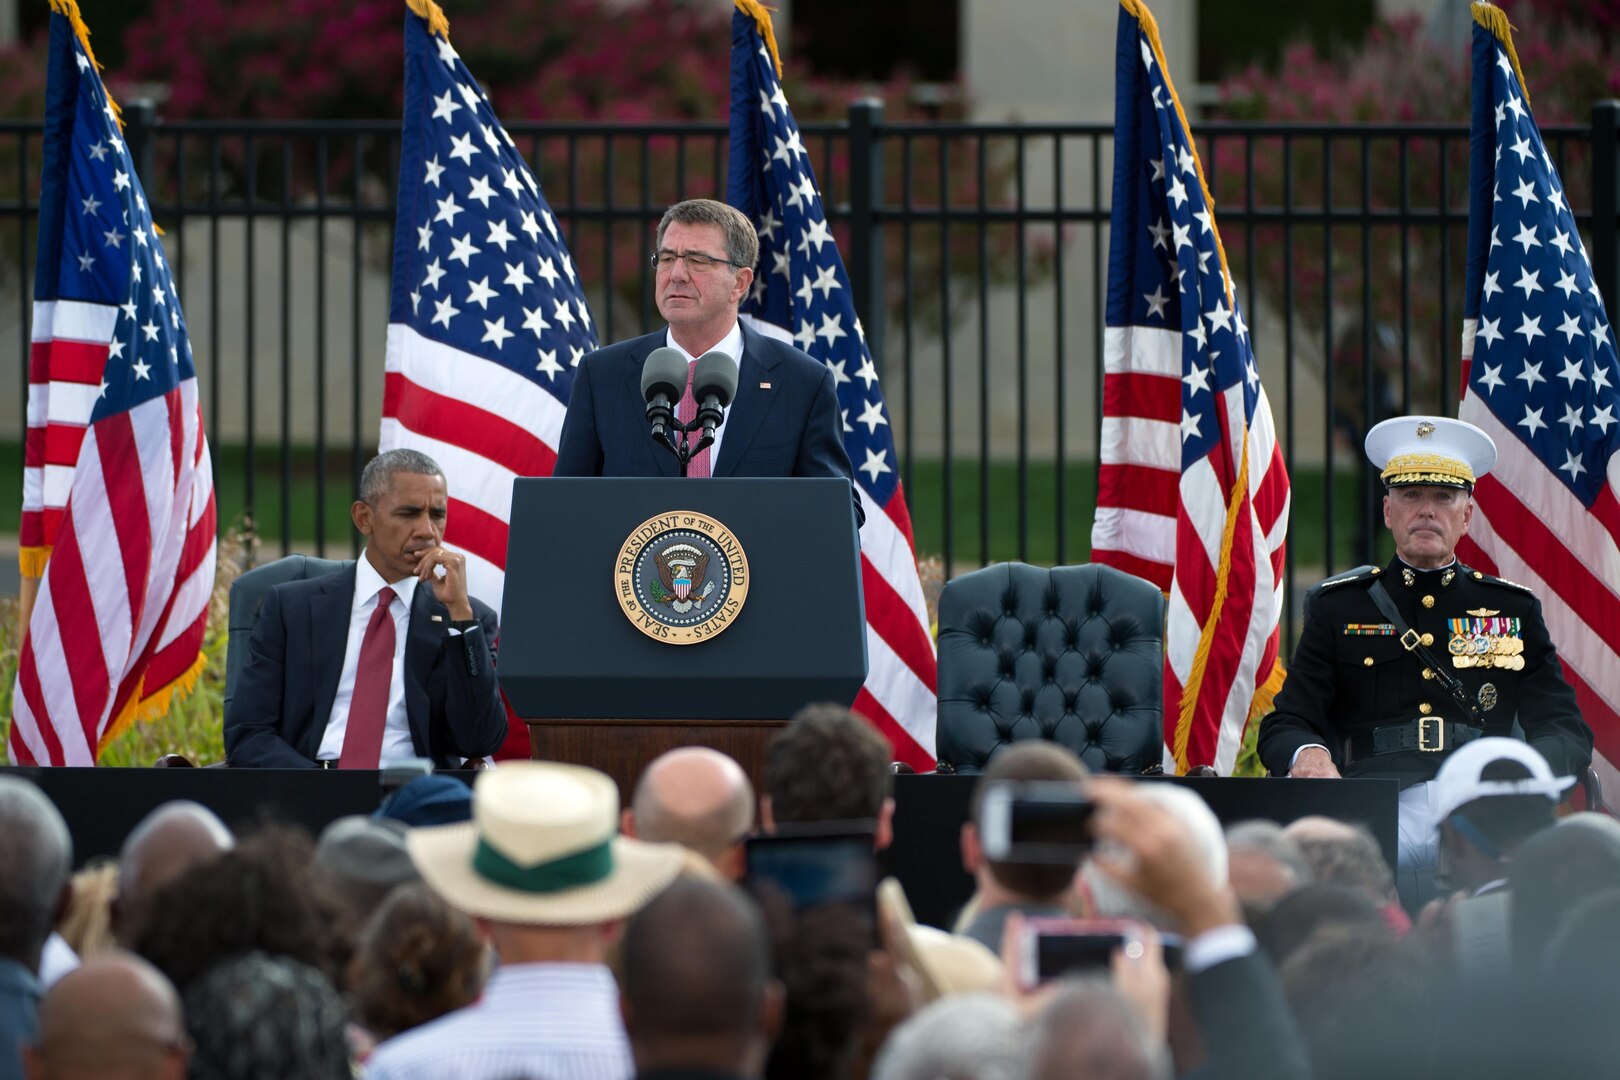 Defense Secretary Ash Carter speaks during an observance ceremony at the Pentagon Memorial, Sept. 11, 2016, marking the 15th anniversary of the 9/11 terrorist attacks. DoD photo by EJ Hersom